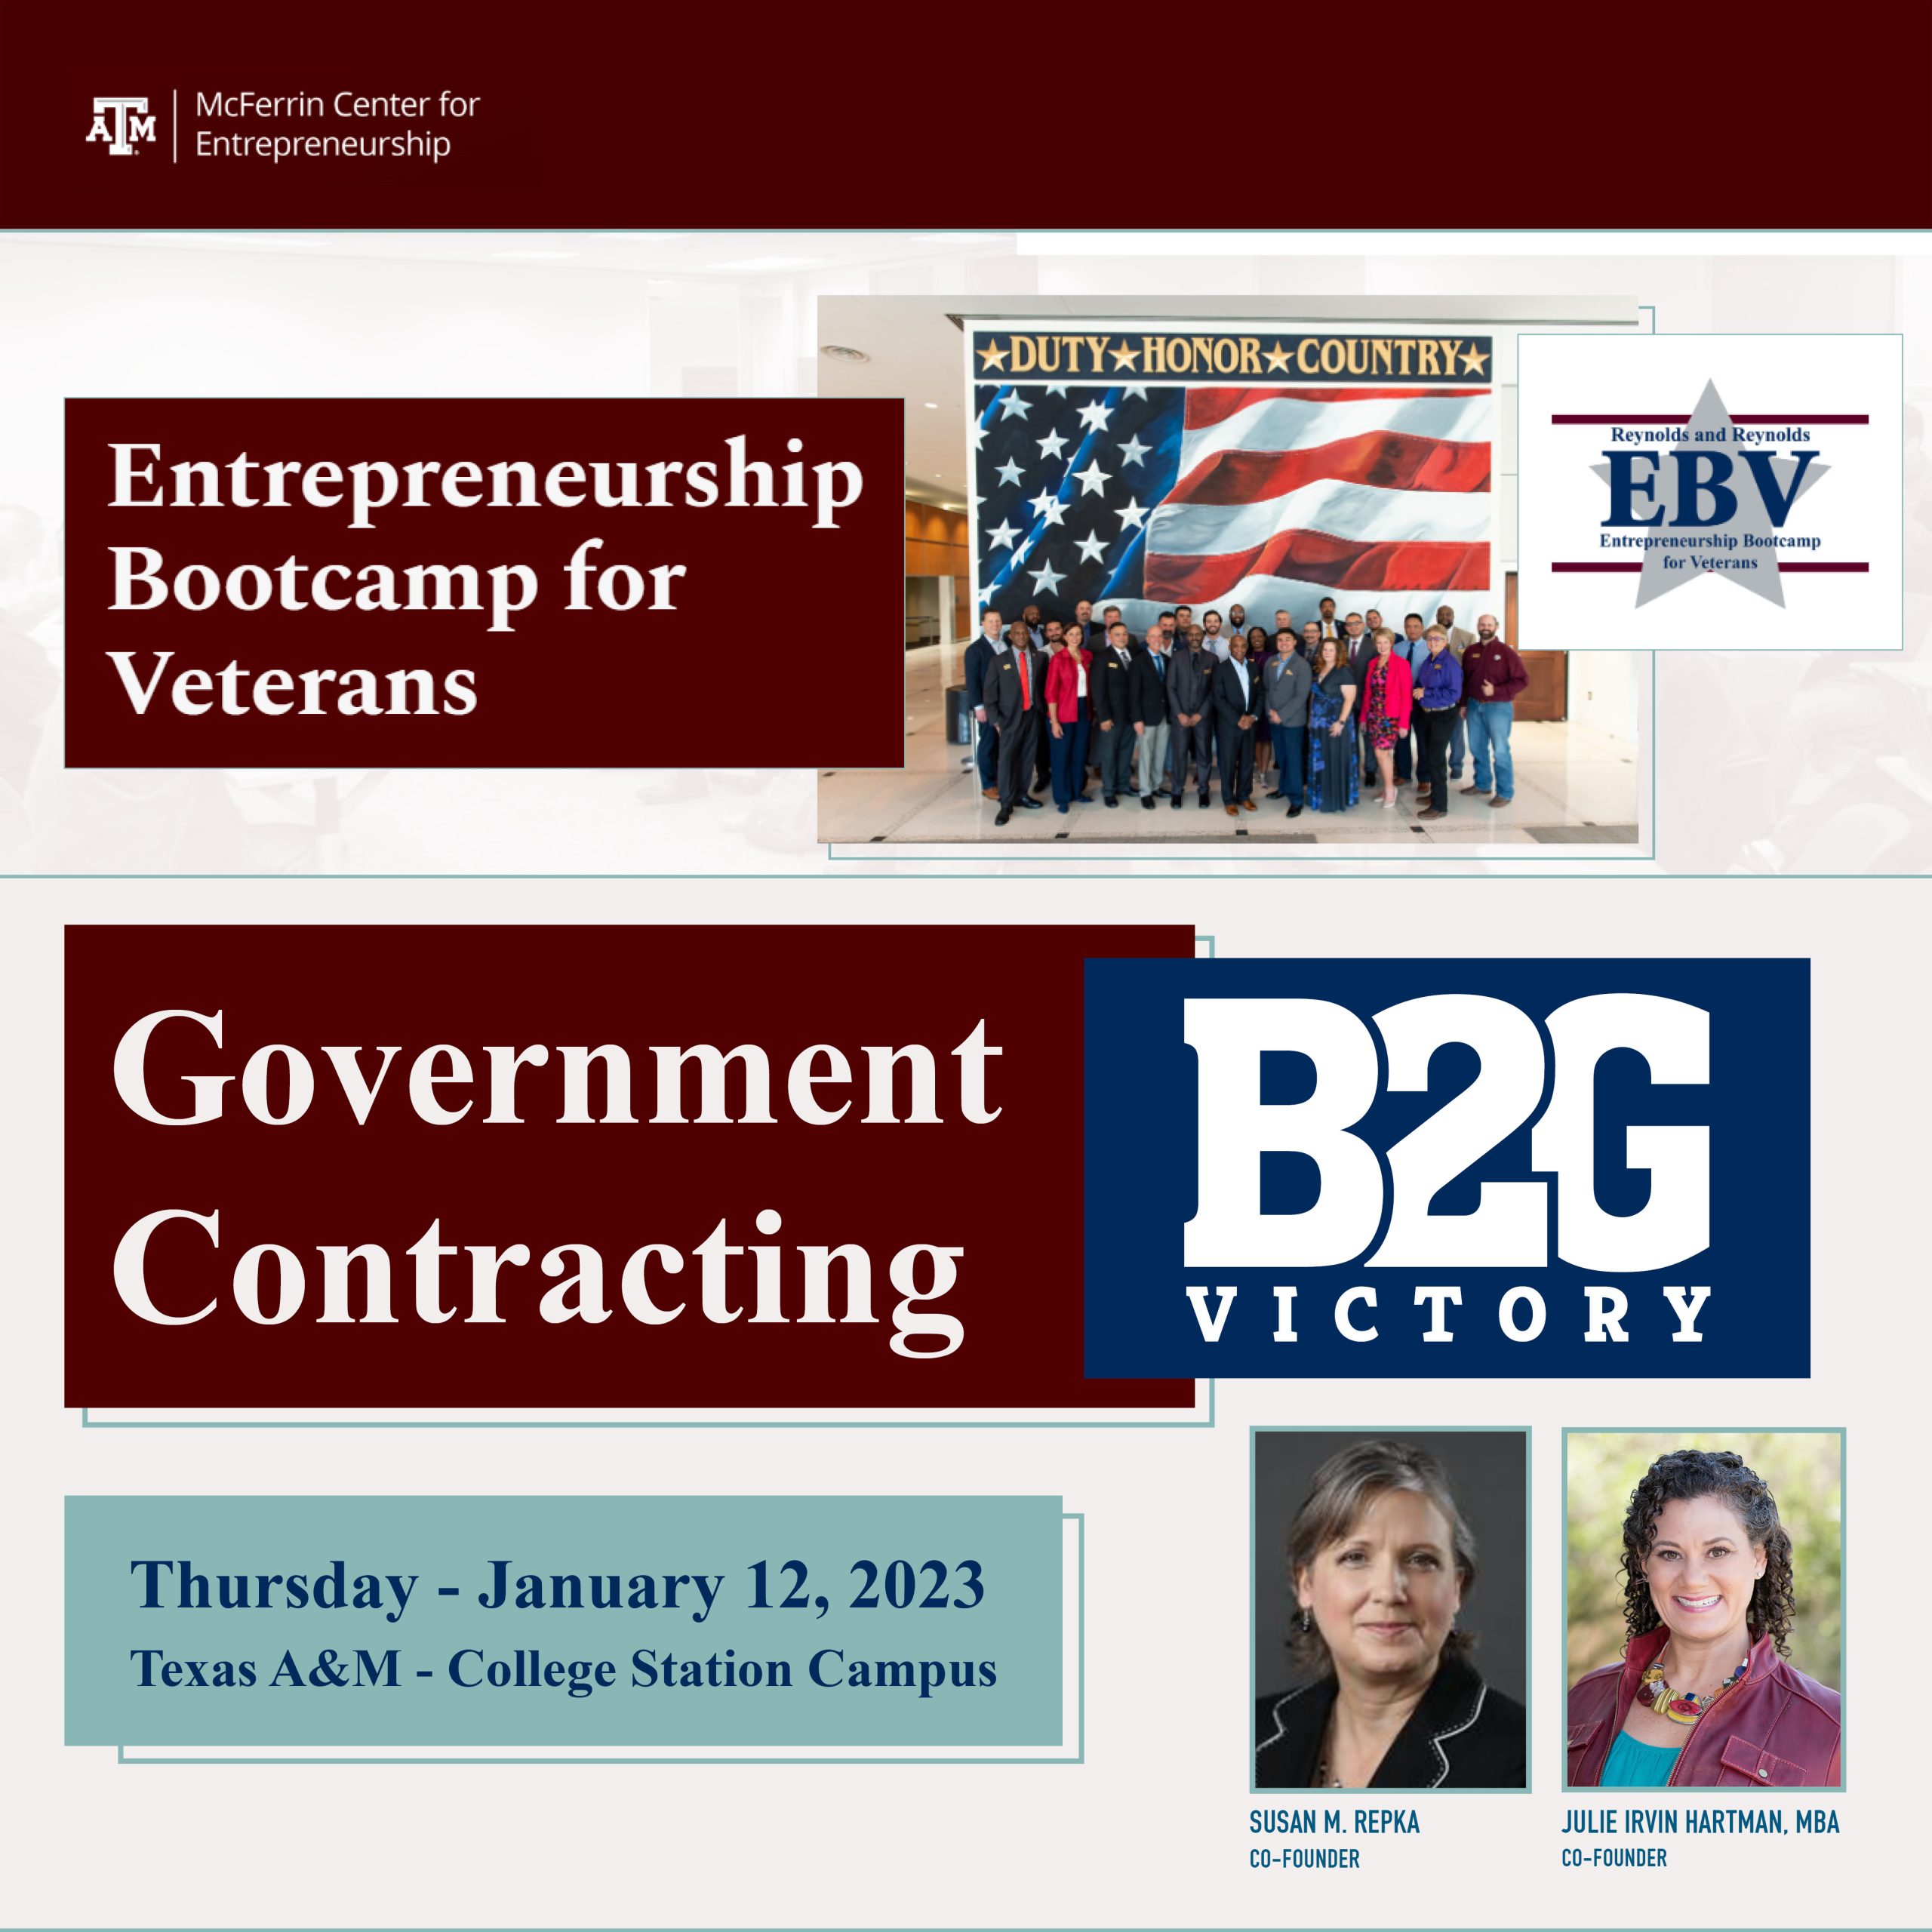 Entrepreneurship Bootcamp for Veterans focused on government contracting on Jan. 12, 2023